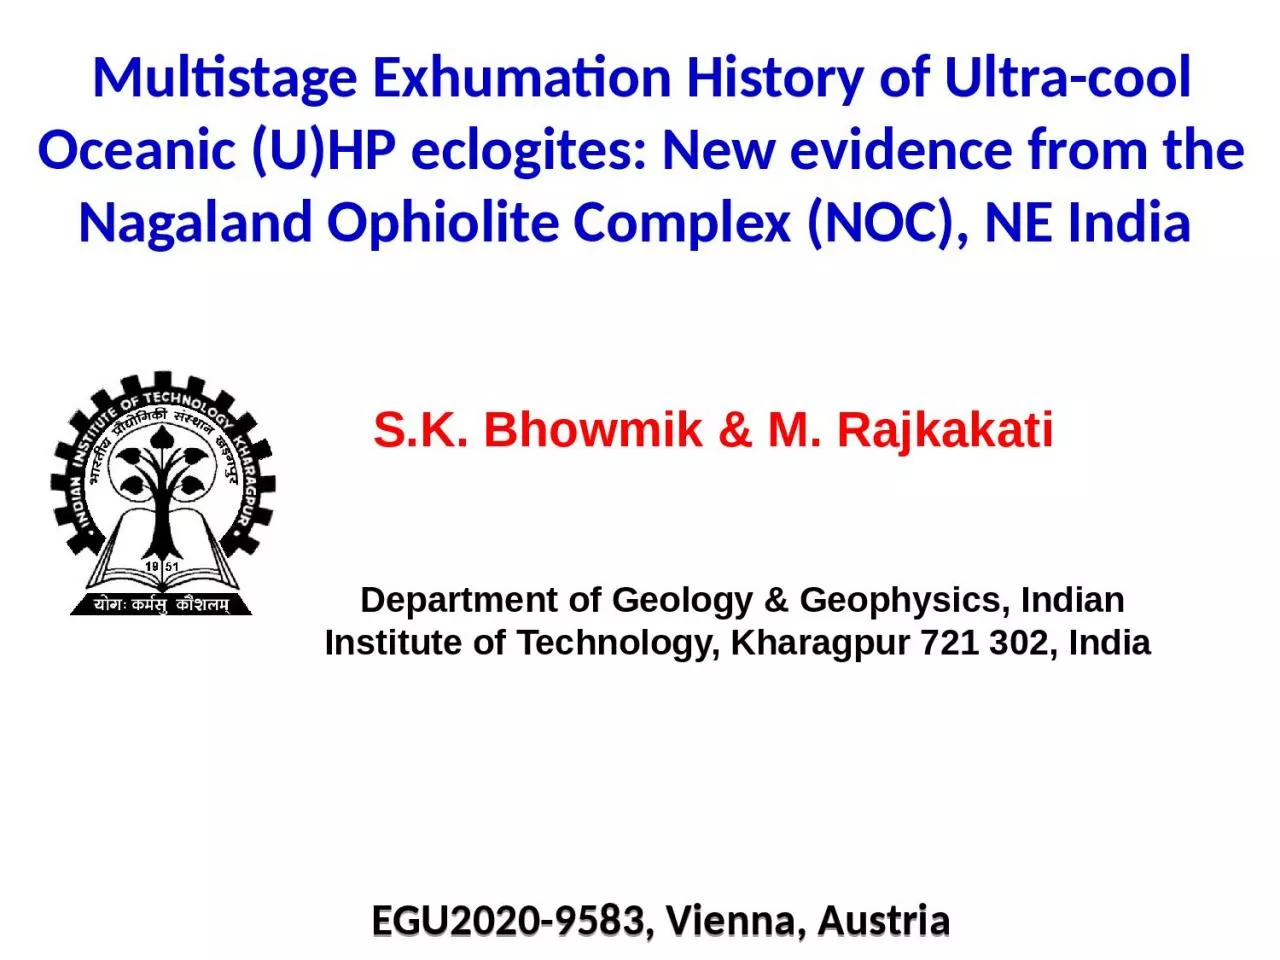 Multistage Exhumation History of Ultra-cool Oceanic (U)HP eclogites: New evidence from